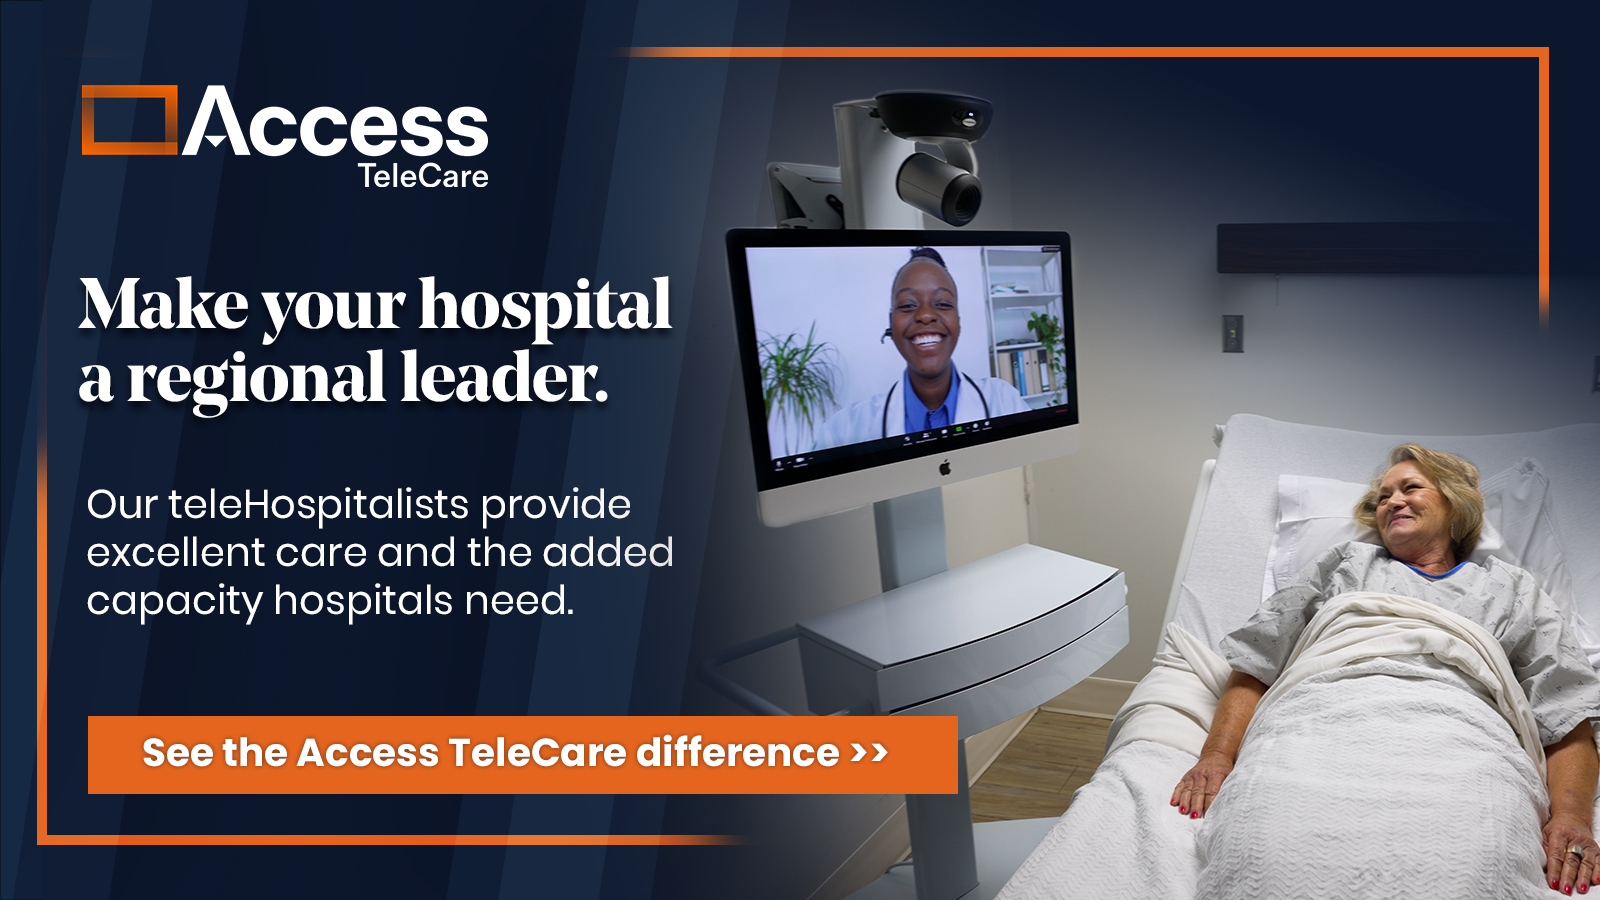 Make your hospital a regional leader. Our teleHospitalists provide excellent care and the added capacity hospitals need.